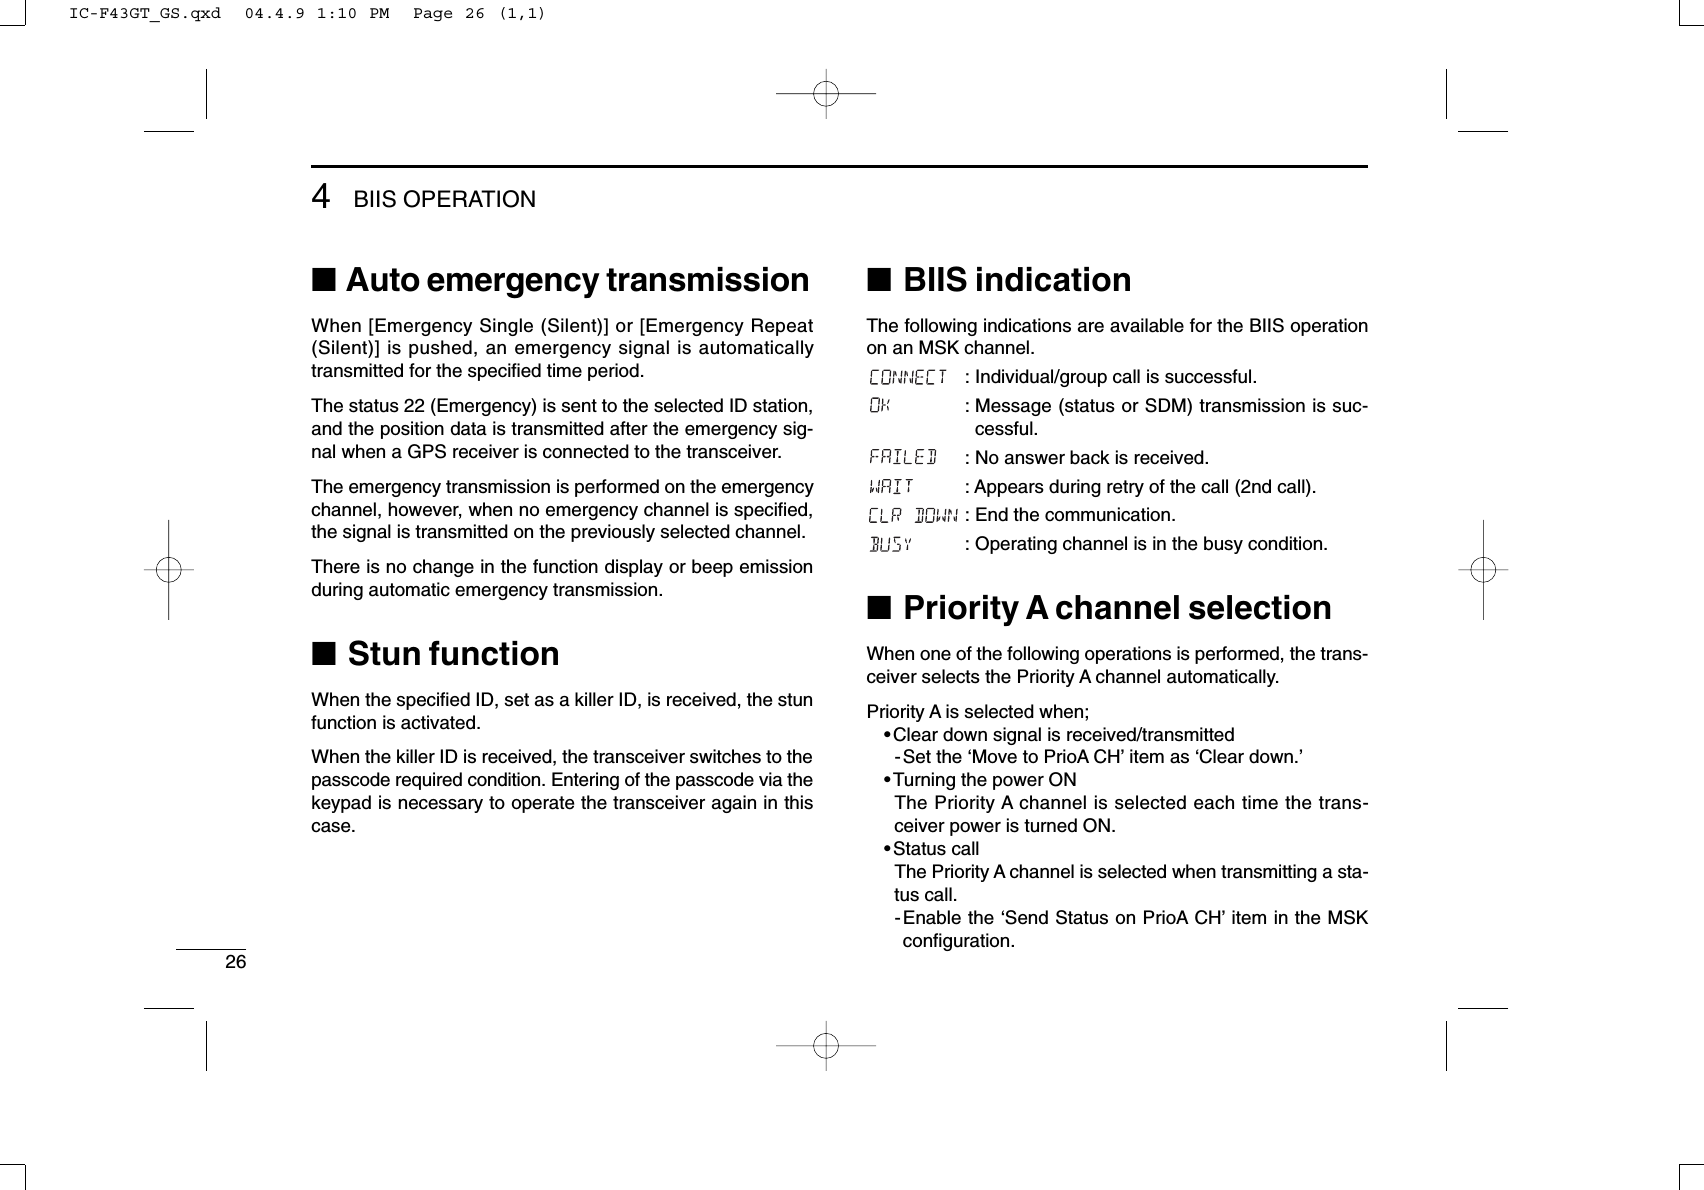 264BIIS OPERATION■Auto emergency transmissionWhen [Emergency Single (Silent)] or [Emergency Repeat(Silent)] is pushed, an emergency signal is automaticallytransmitted for the speciﬁed time period.The status 22 (Emergency) is sent to the selected ID station,and the position data is transmitted after the emergency sig-nal when a GPS receiver is connected to the transceiver.The emergency transmission is performed on the emergencychannel, however, when no emergency channel is speciﬁed,the signal is transmitted on the previously selected channel.There is no change in the function display or beep emissionduring automatic emergency transmission.■Stun functionWhen the speciﬁed ID, set as a killer ID, is received, the stunfunction is activated.When the killer ID is received, the transceiver switches to thepasscode required condition. Entering of the passcode via thekeypad is necessary to operate the transceiver again in thiscase.■BIIS indicationThe following indications are available for the BIIS operationon an MSK channel.: Individual/group call is successful.: Message (status or SDM) transmission is suc-cessful.: No answer back is received.: Appears during retry of the call (2nd call).: End the communication.: Operating channel is in the busy condition.■Priority A channel selectionWhen one of the following operations is performed, the trans-ceiver selects the Priority A channel automatically.Priority A is selected when;•Clear down signal is received/transmitted-Set the ‘Move to PrioA CH’item as ‘Clear down.’•Turning the power ONThe Priority A channel is selected each time the trans-ceiver power is turned ON.•Status callThe Priority A channel is selected when transmitting a sta-tus call.-Enable the ‘Send Status on PrioA CH’item in the MSKconﬁguration.IC-F43GT_GS.qxd  04.4.9 1:10 PM  Page 26 (1,1)